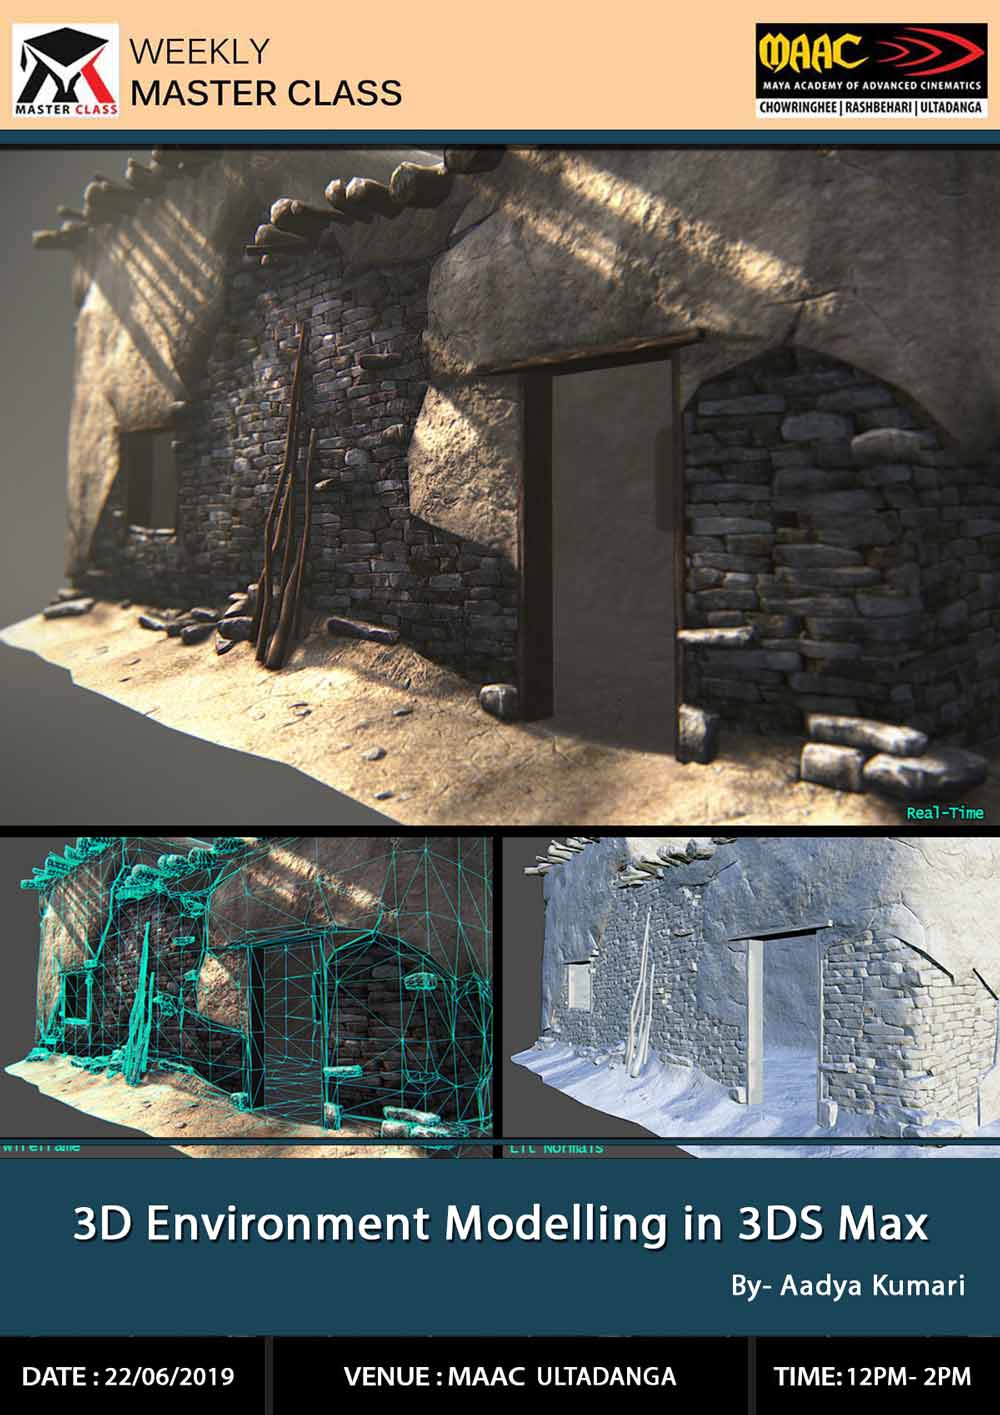 Weekly Master Class on 3D Environment Modelling in 3Ds Max